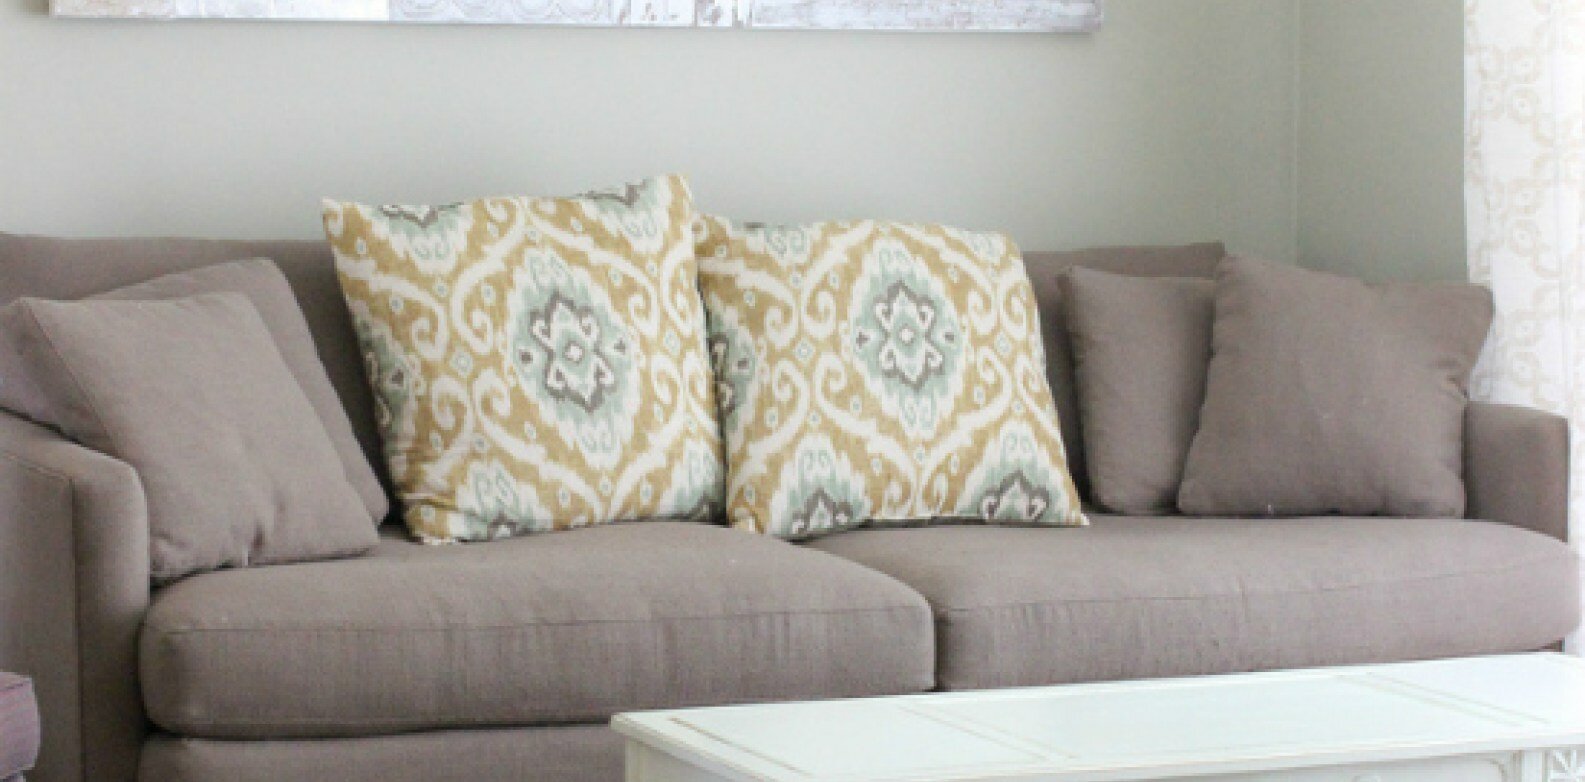 Crate Barrel Lounge | Crate and Barrel Furniture Covers | Crate and Barrel Couch